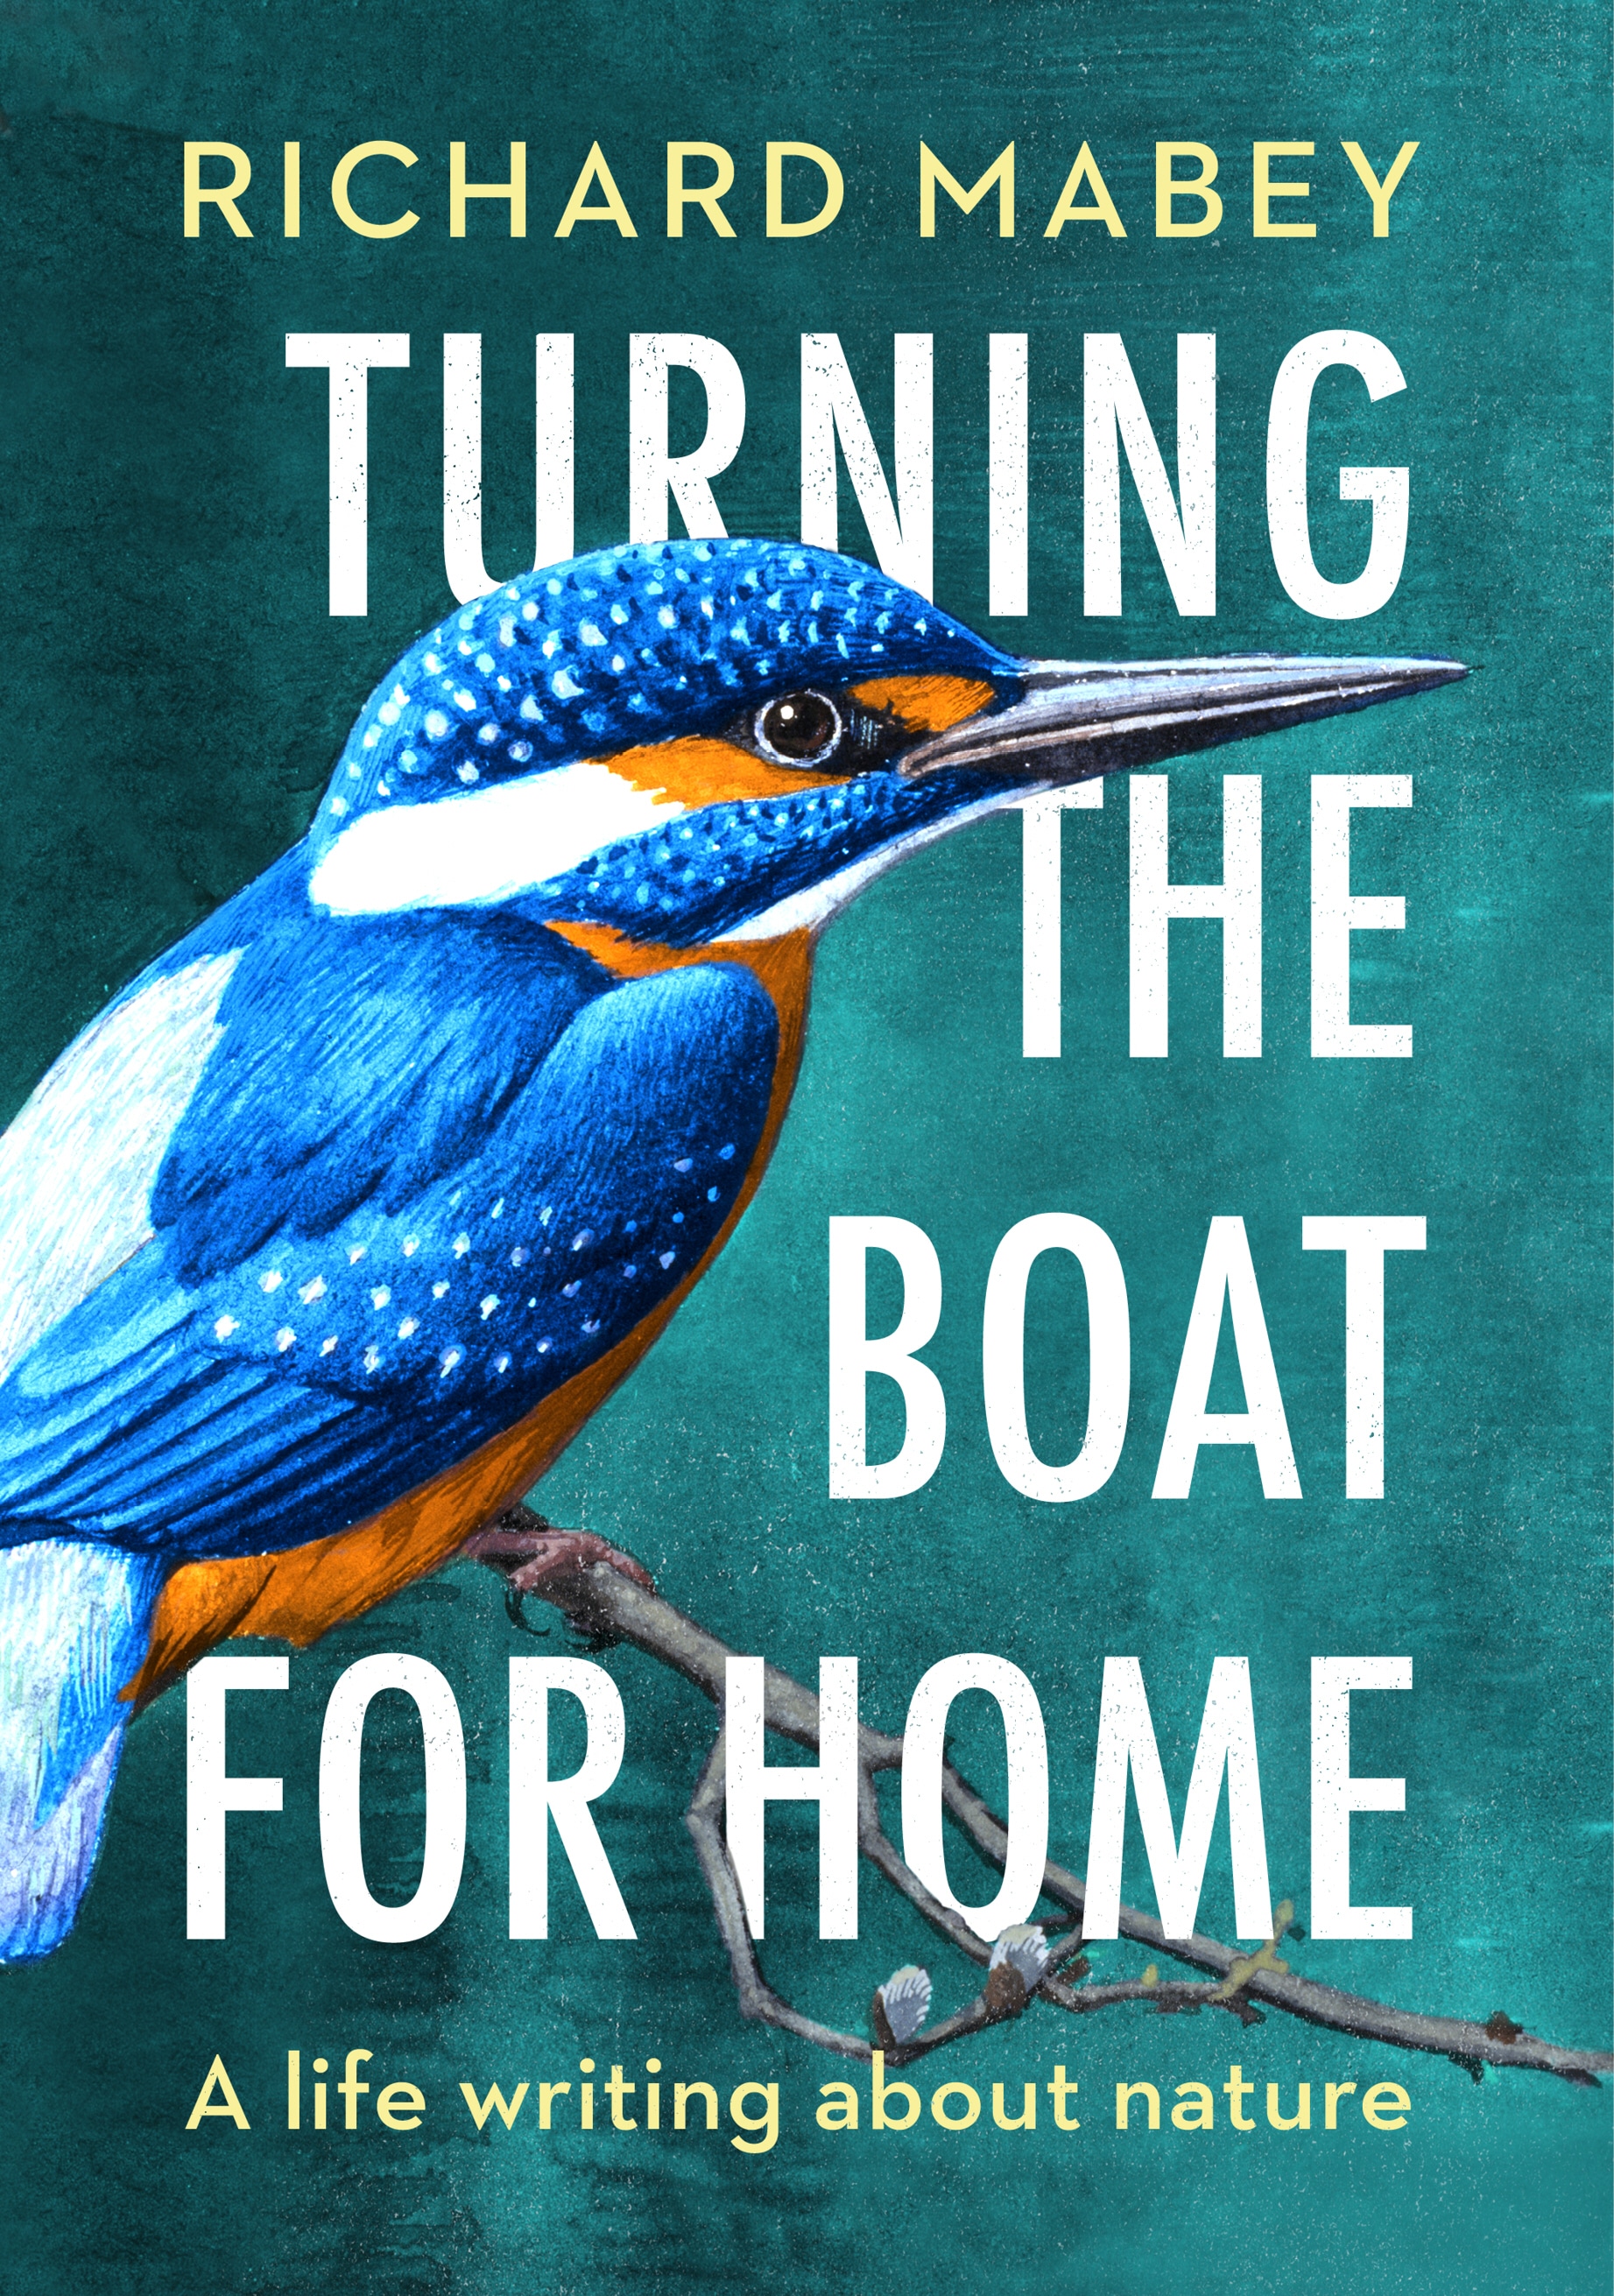 Book “Turning the Boat for Home” by Richard Mabey — October 3, 2019